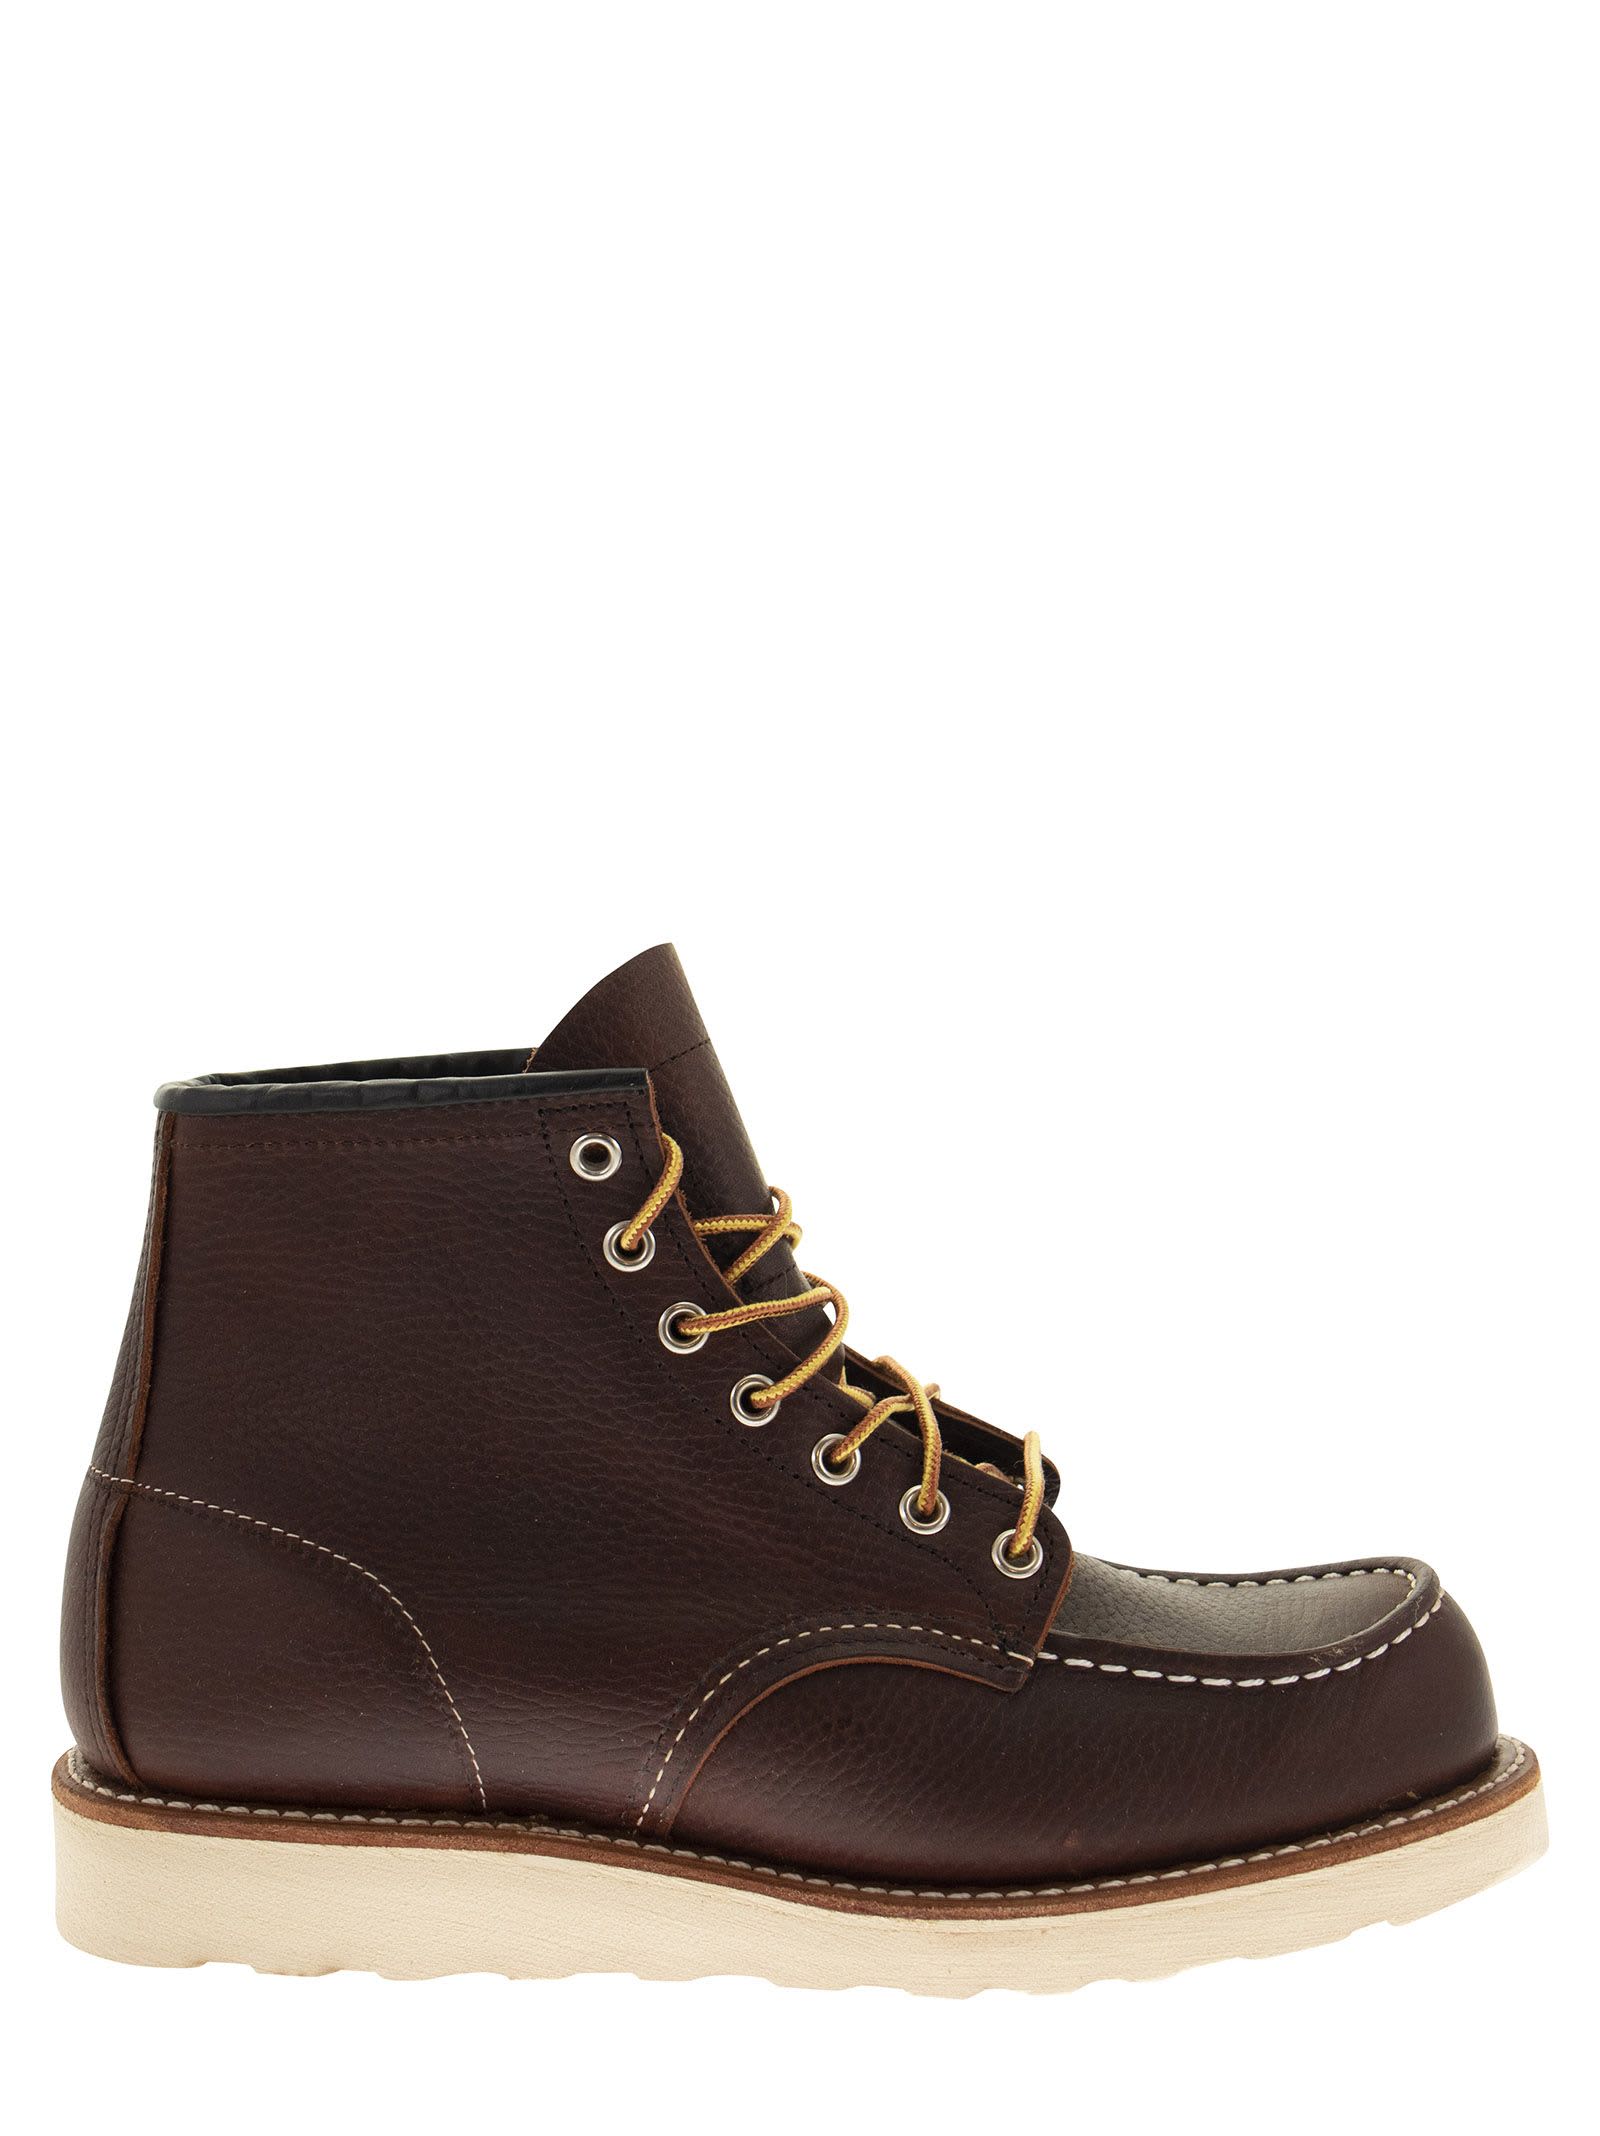 RED WING CLASSIC MOC 8138 - LACE-UP BOOT